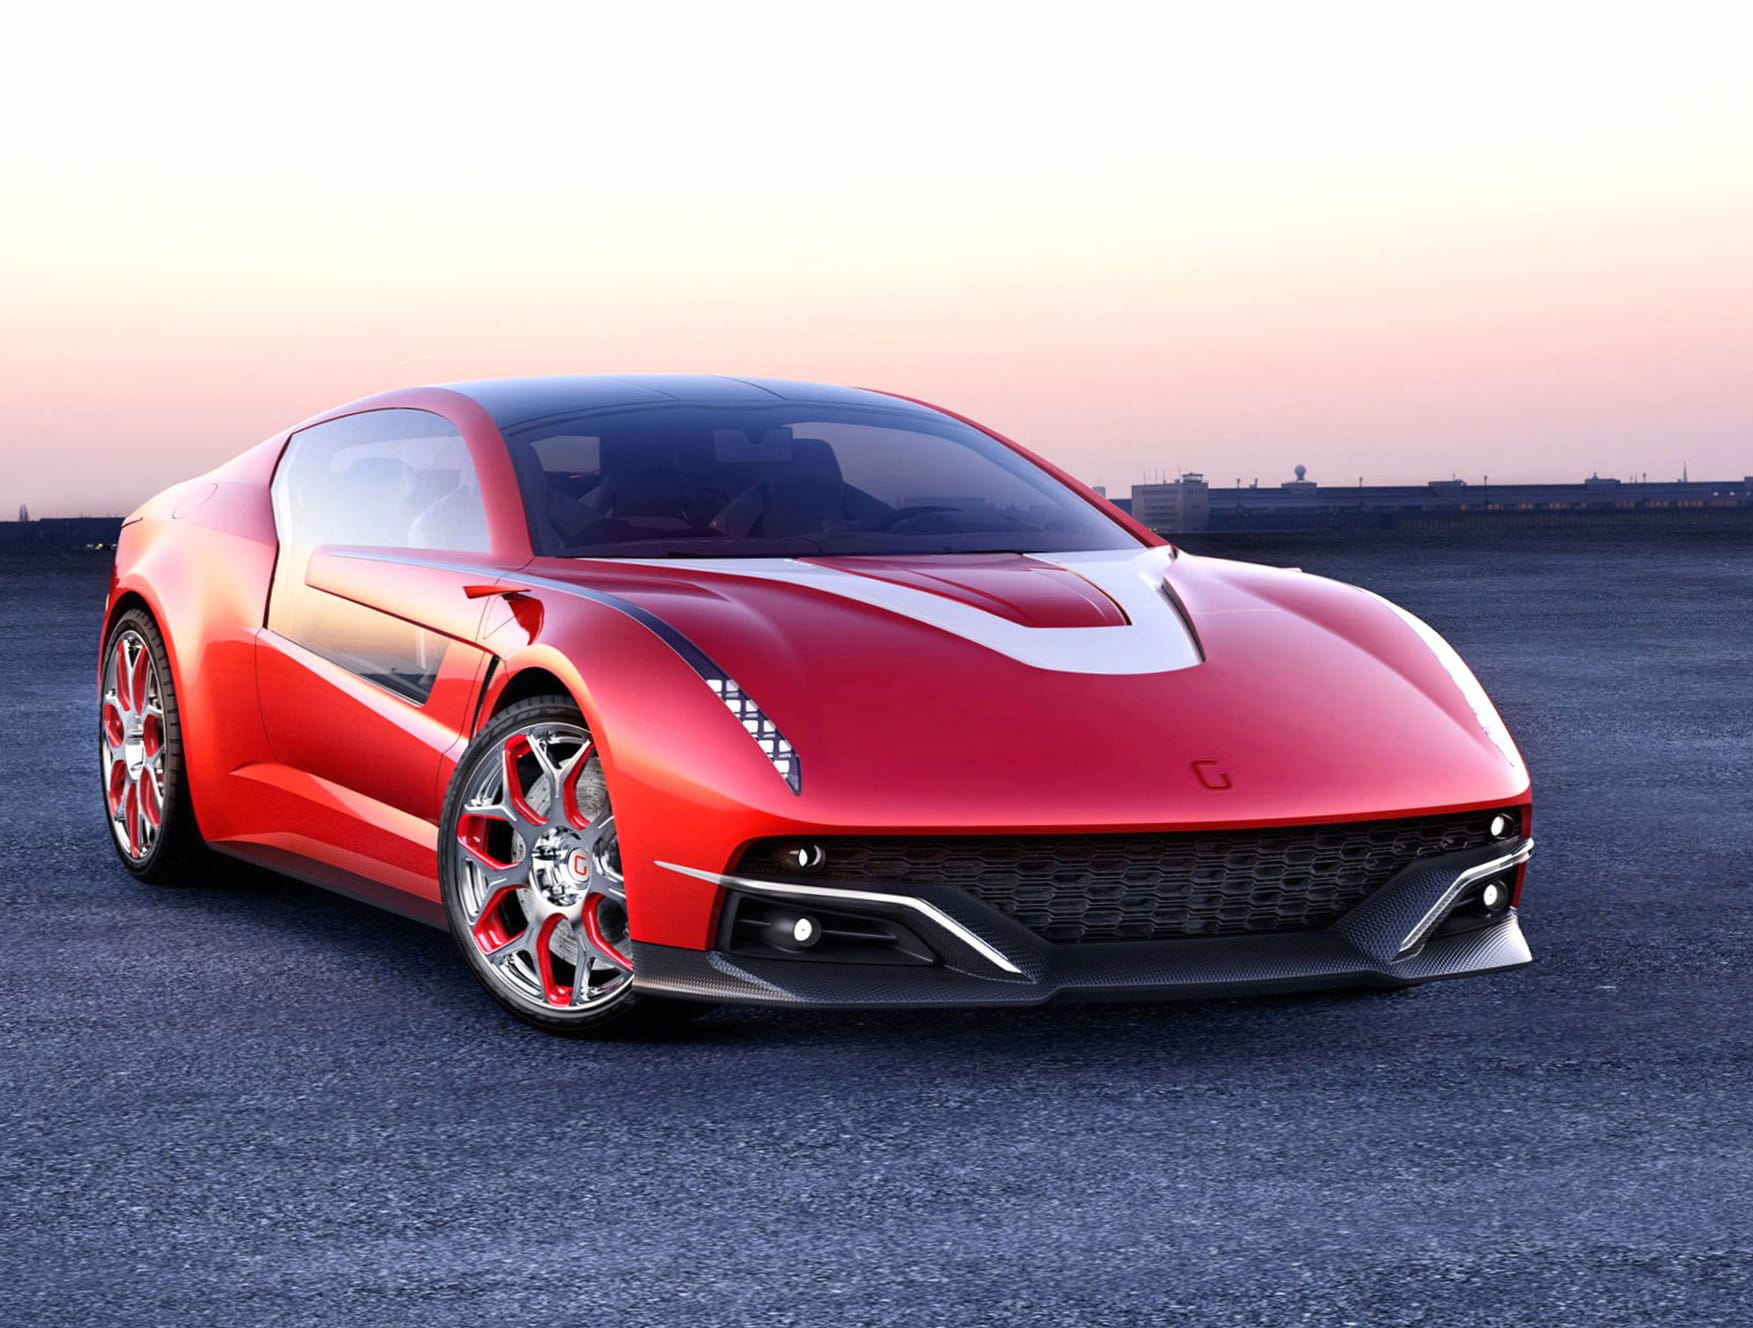 Italdesign Brivido Concept wallpapers HD quality